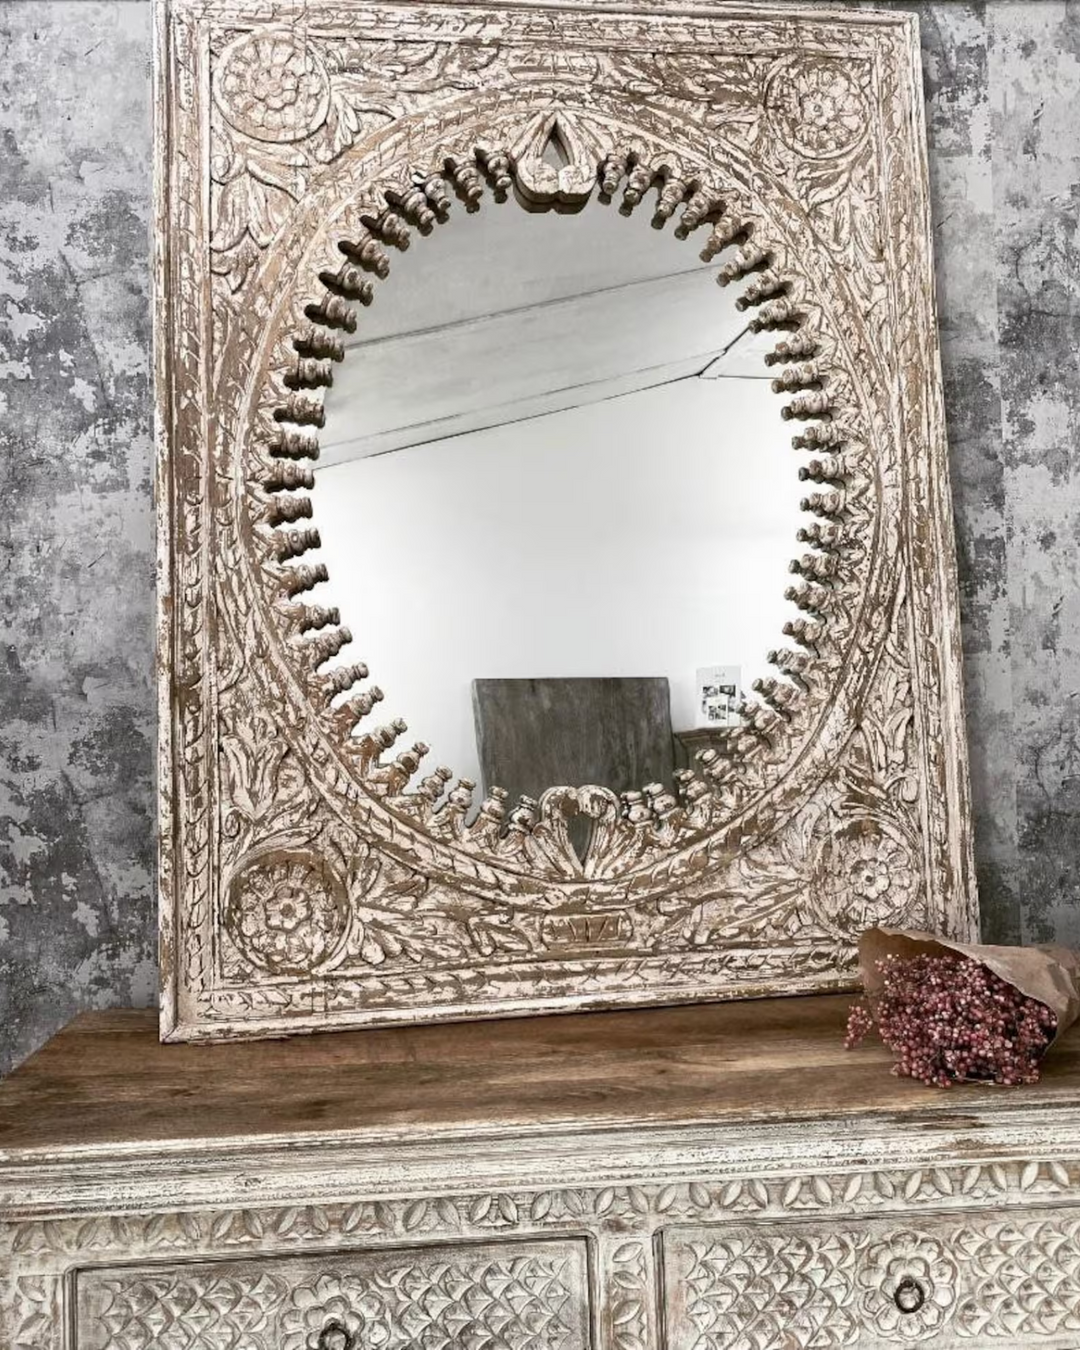 Exquisite Handmade Indian Mirror from Vintage Printing Blocks